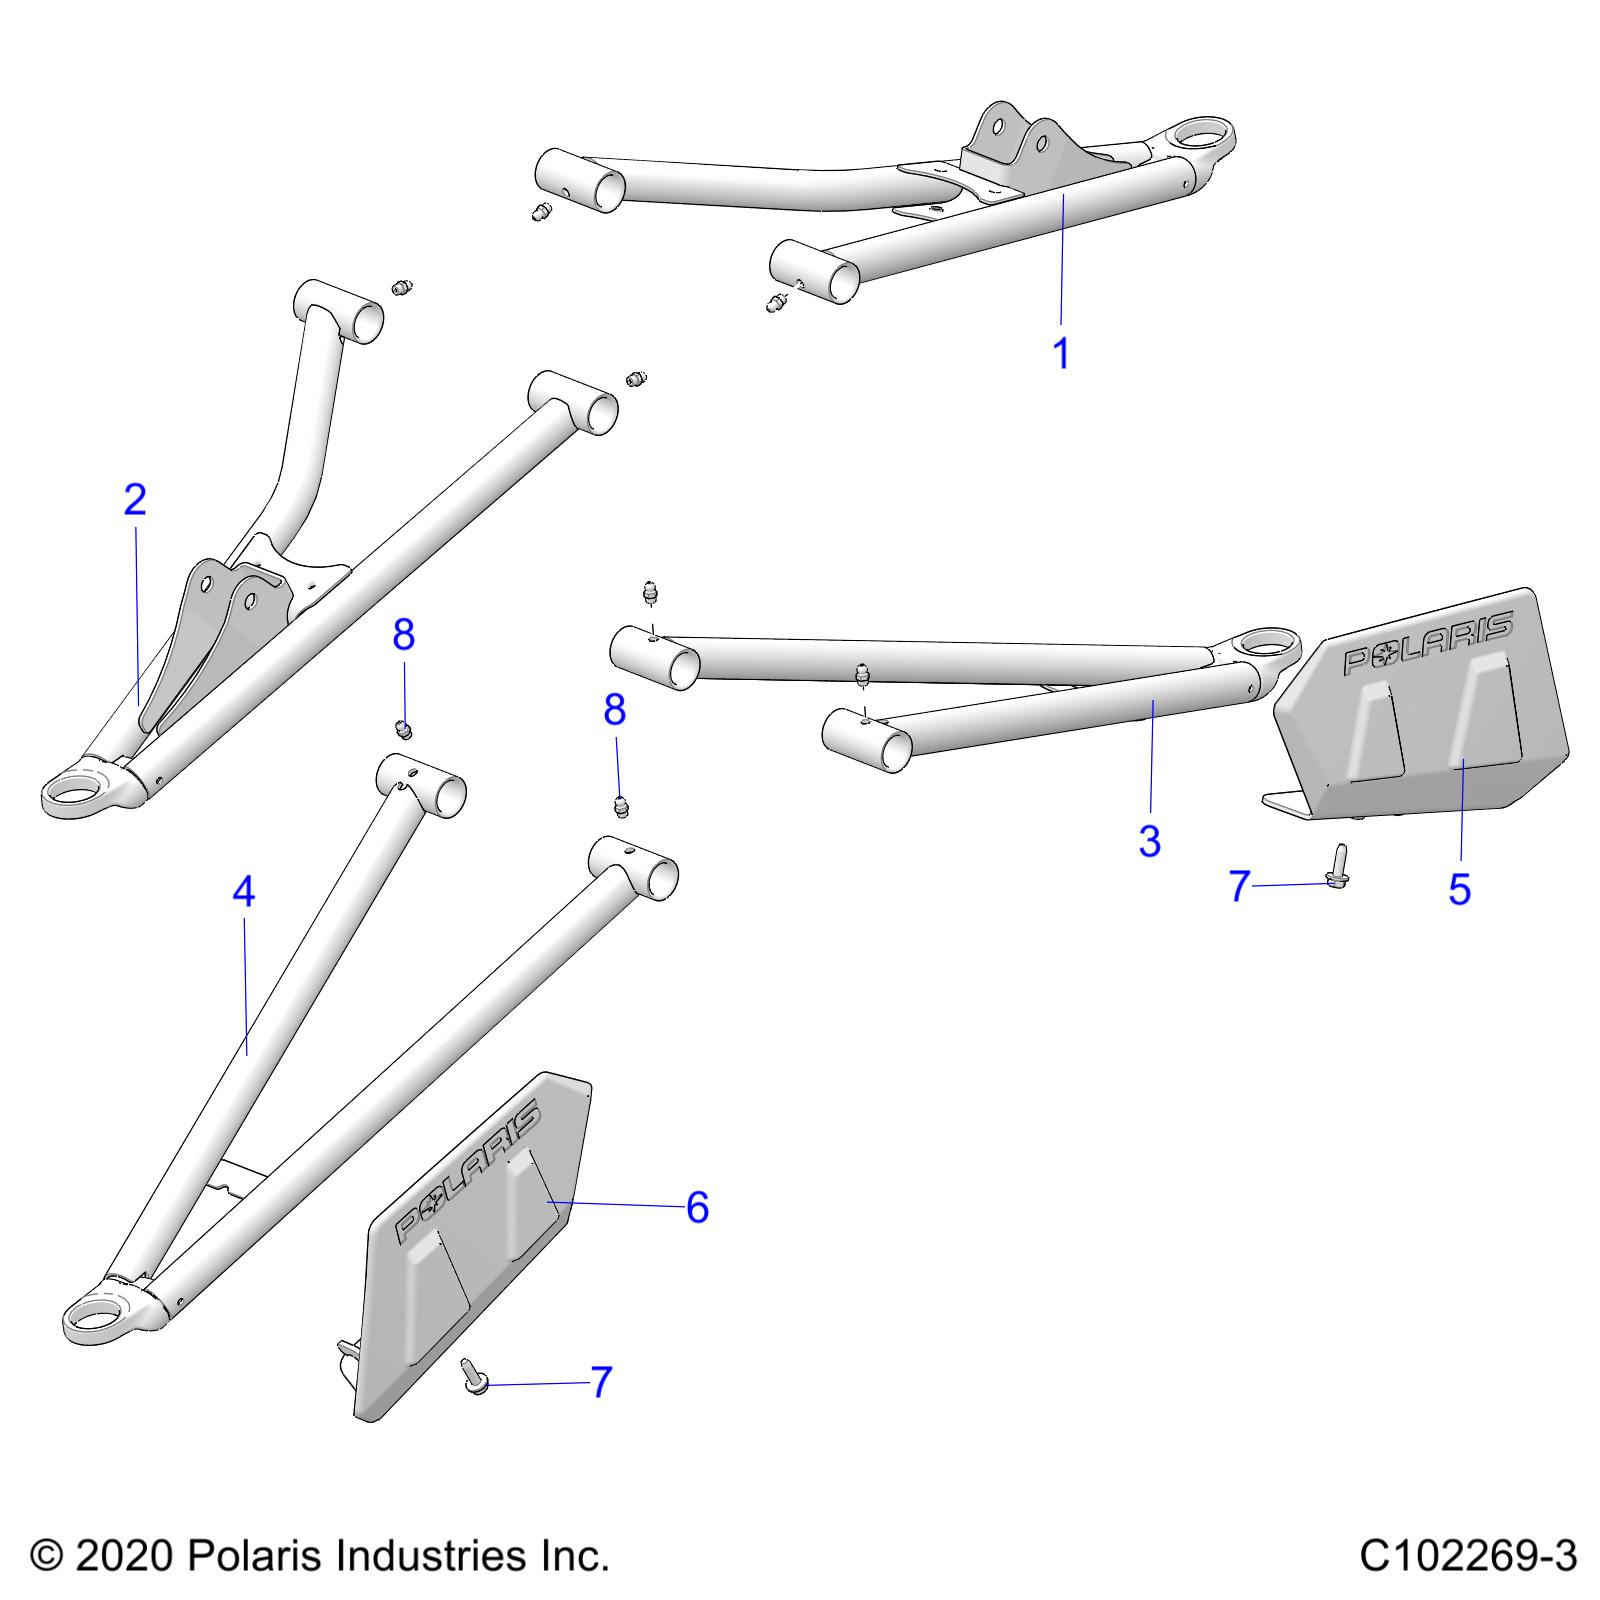 Part Number : 1019809-293 ARM CONTROL FRONT UPPER RIGHT